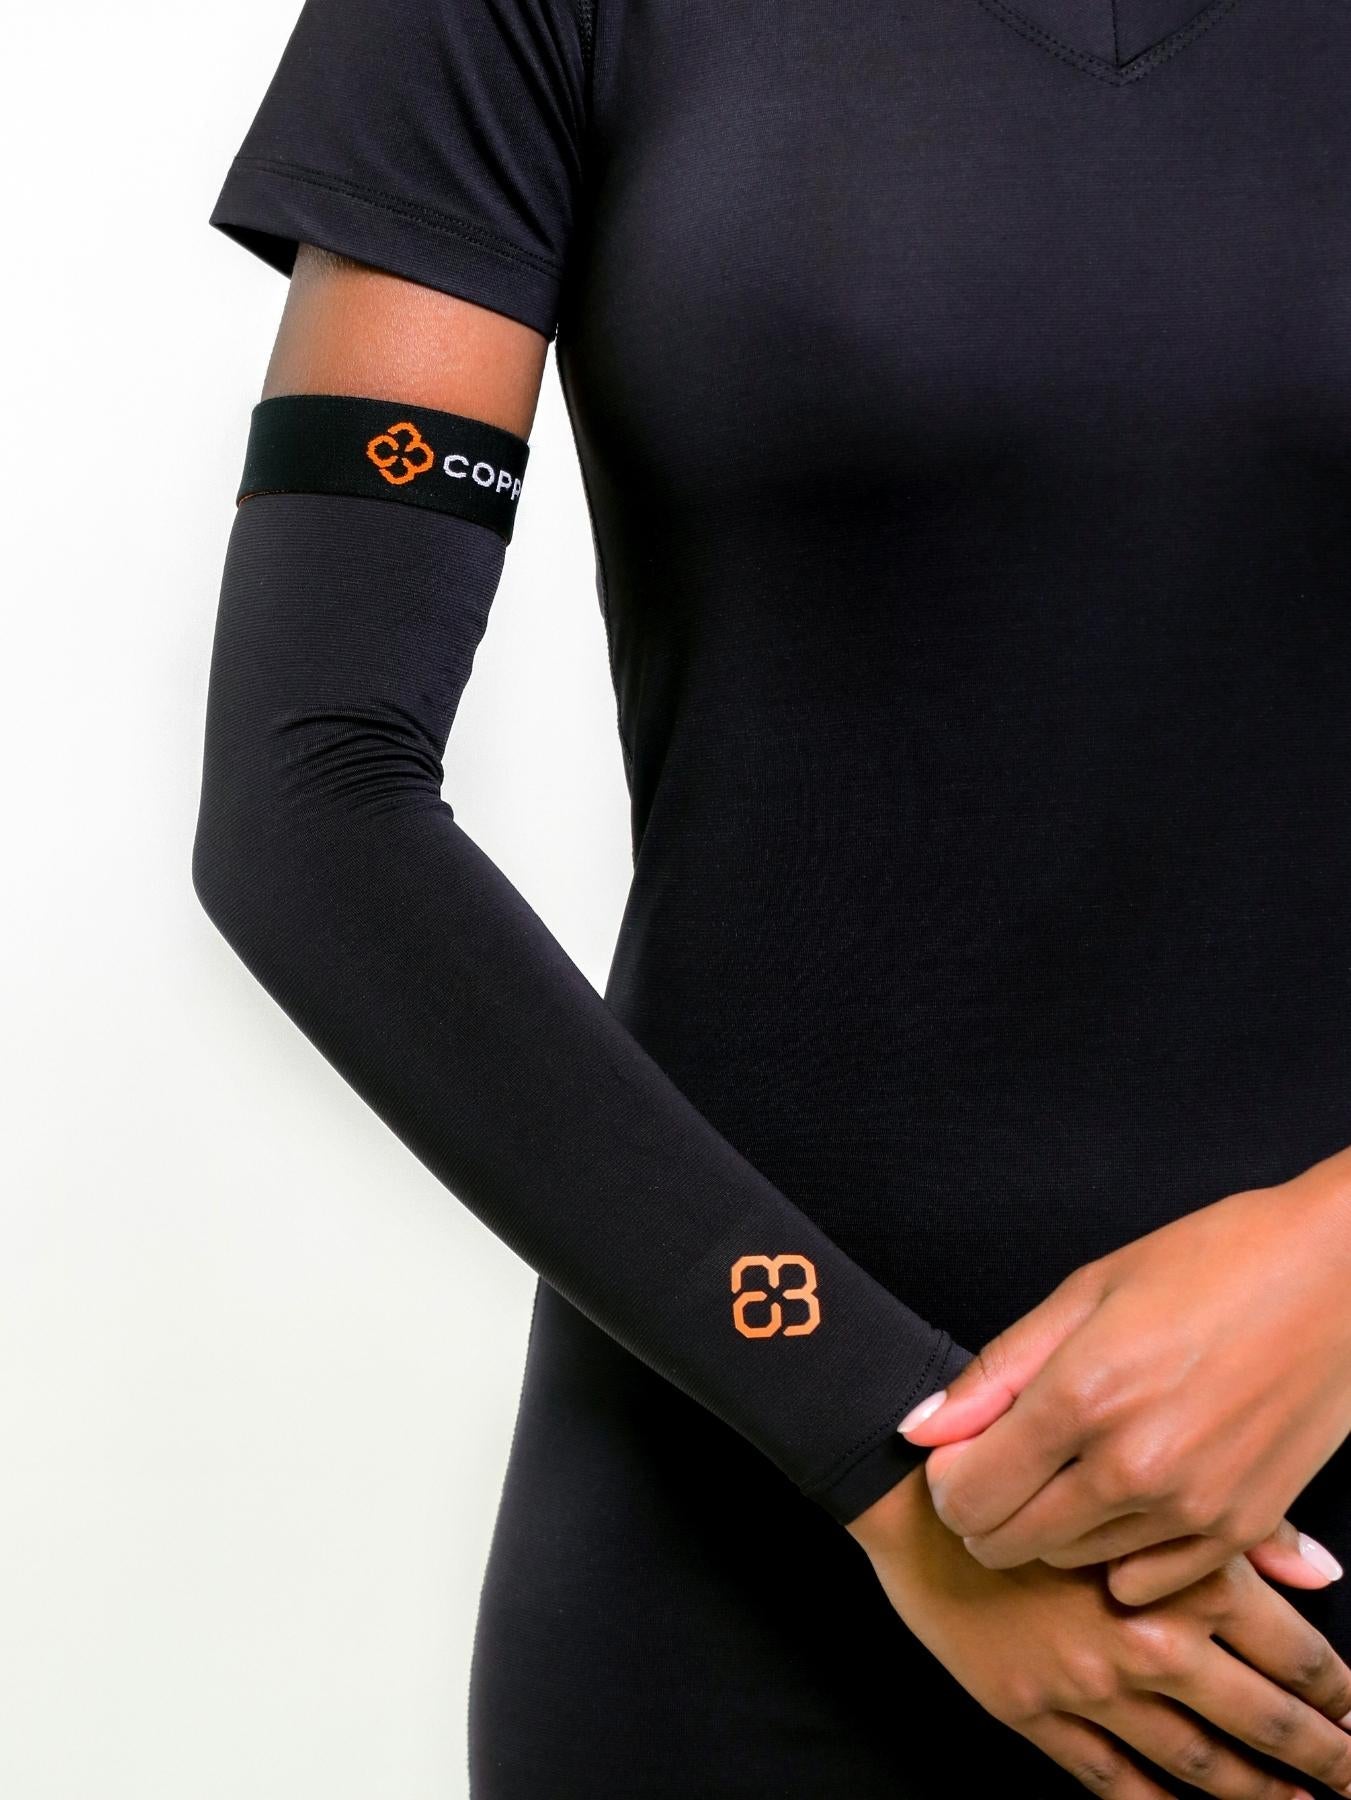 Tommie Copper® Women's Long Sleeve Compression Support Shirt